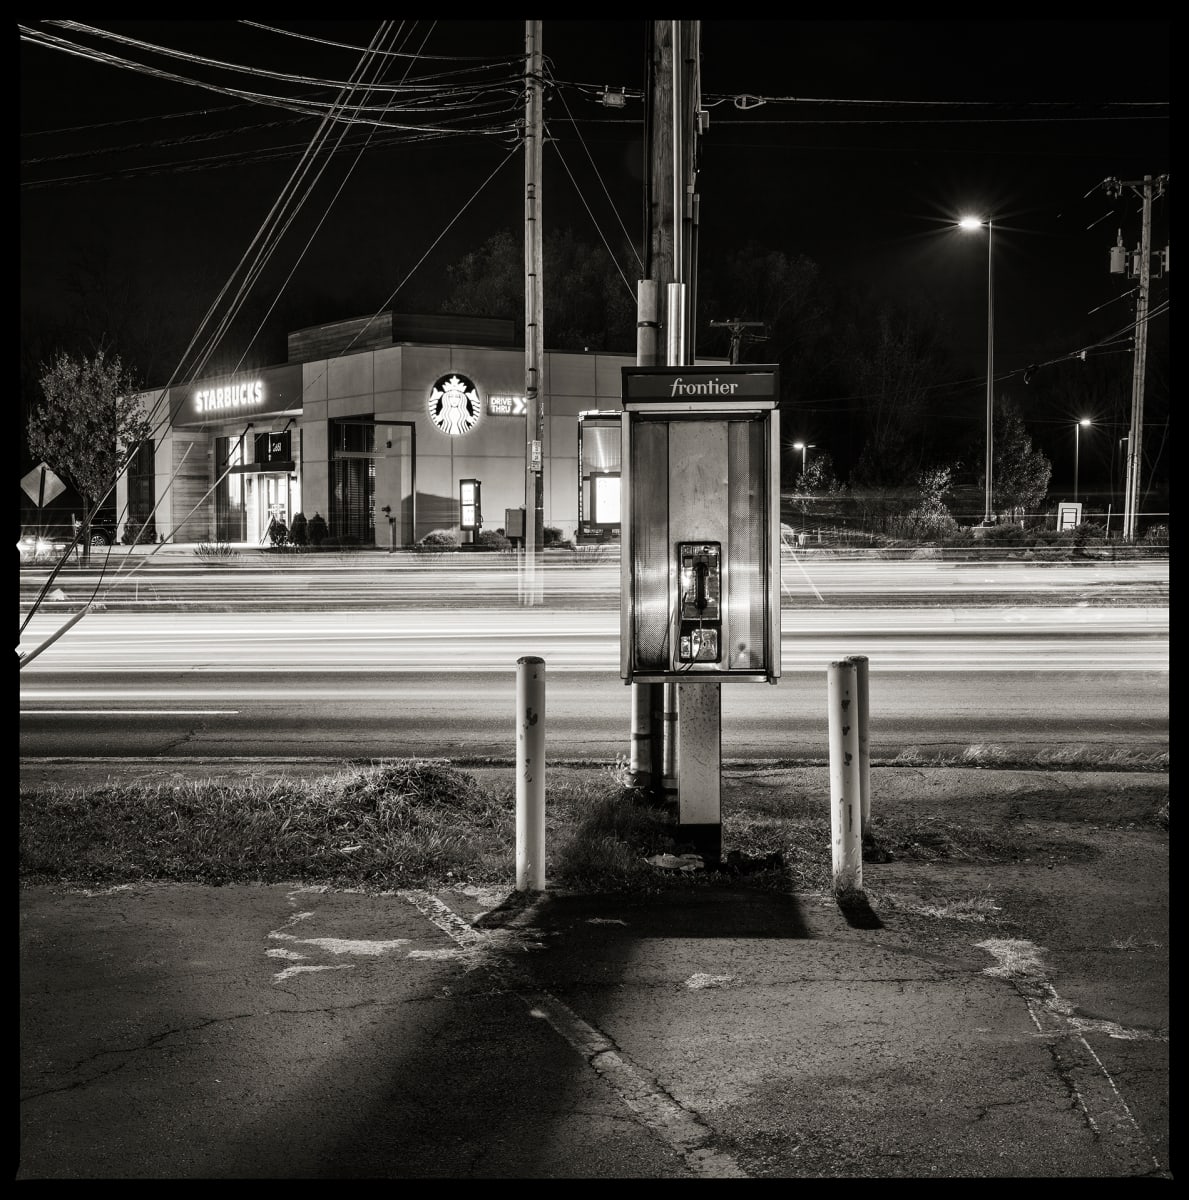 585.427.9848 – Stoney’s Plaza, 2852 West Henrietta Road, Henrietta, NY 14623 by Eric T. Kunsman  Image: ID: A black and white image shows a payphone against a telephone pole.  Behind the payphone is a Starbucks.